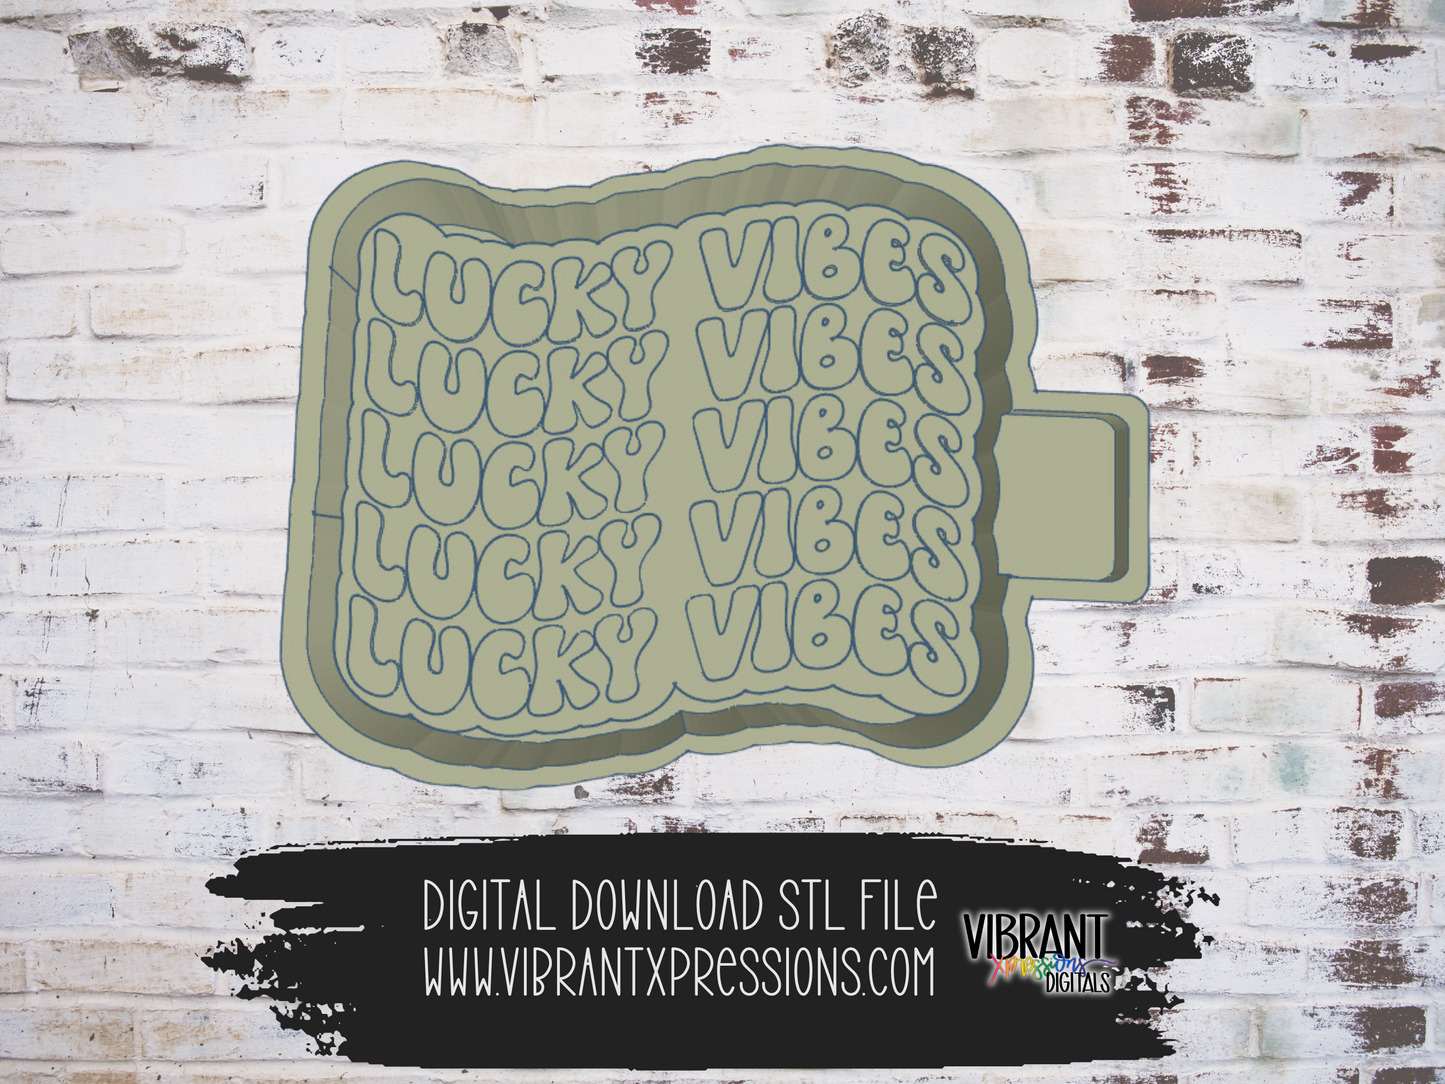 Lucky Vibes Mold Maker STL File